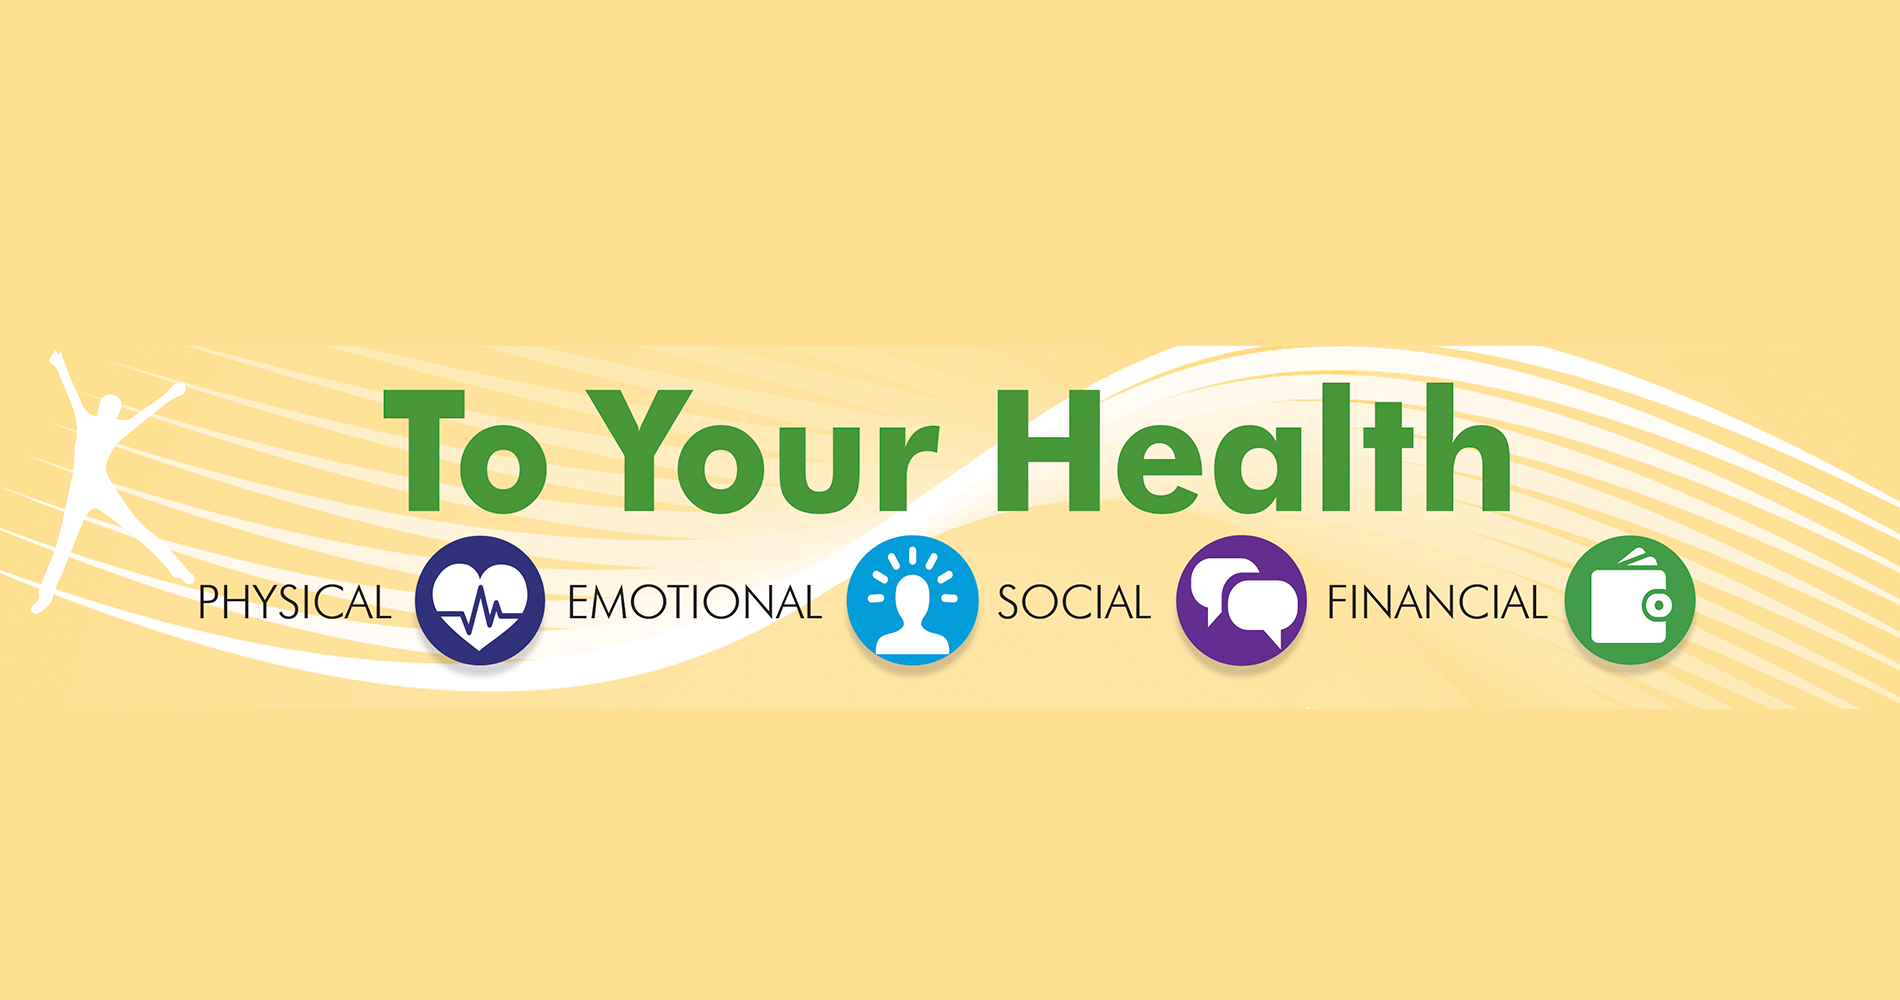 To Your Health, physical, emotional, social, financial well-being